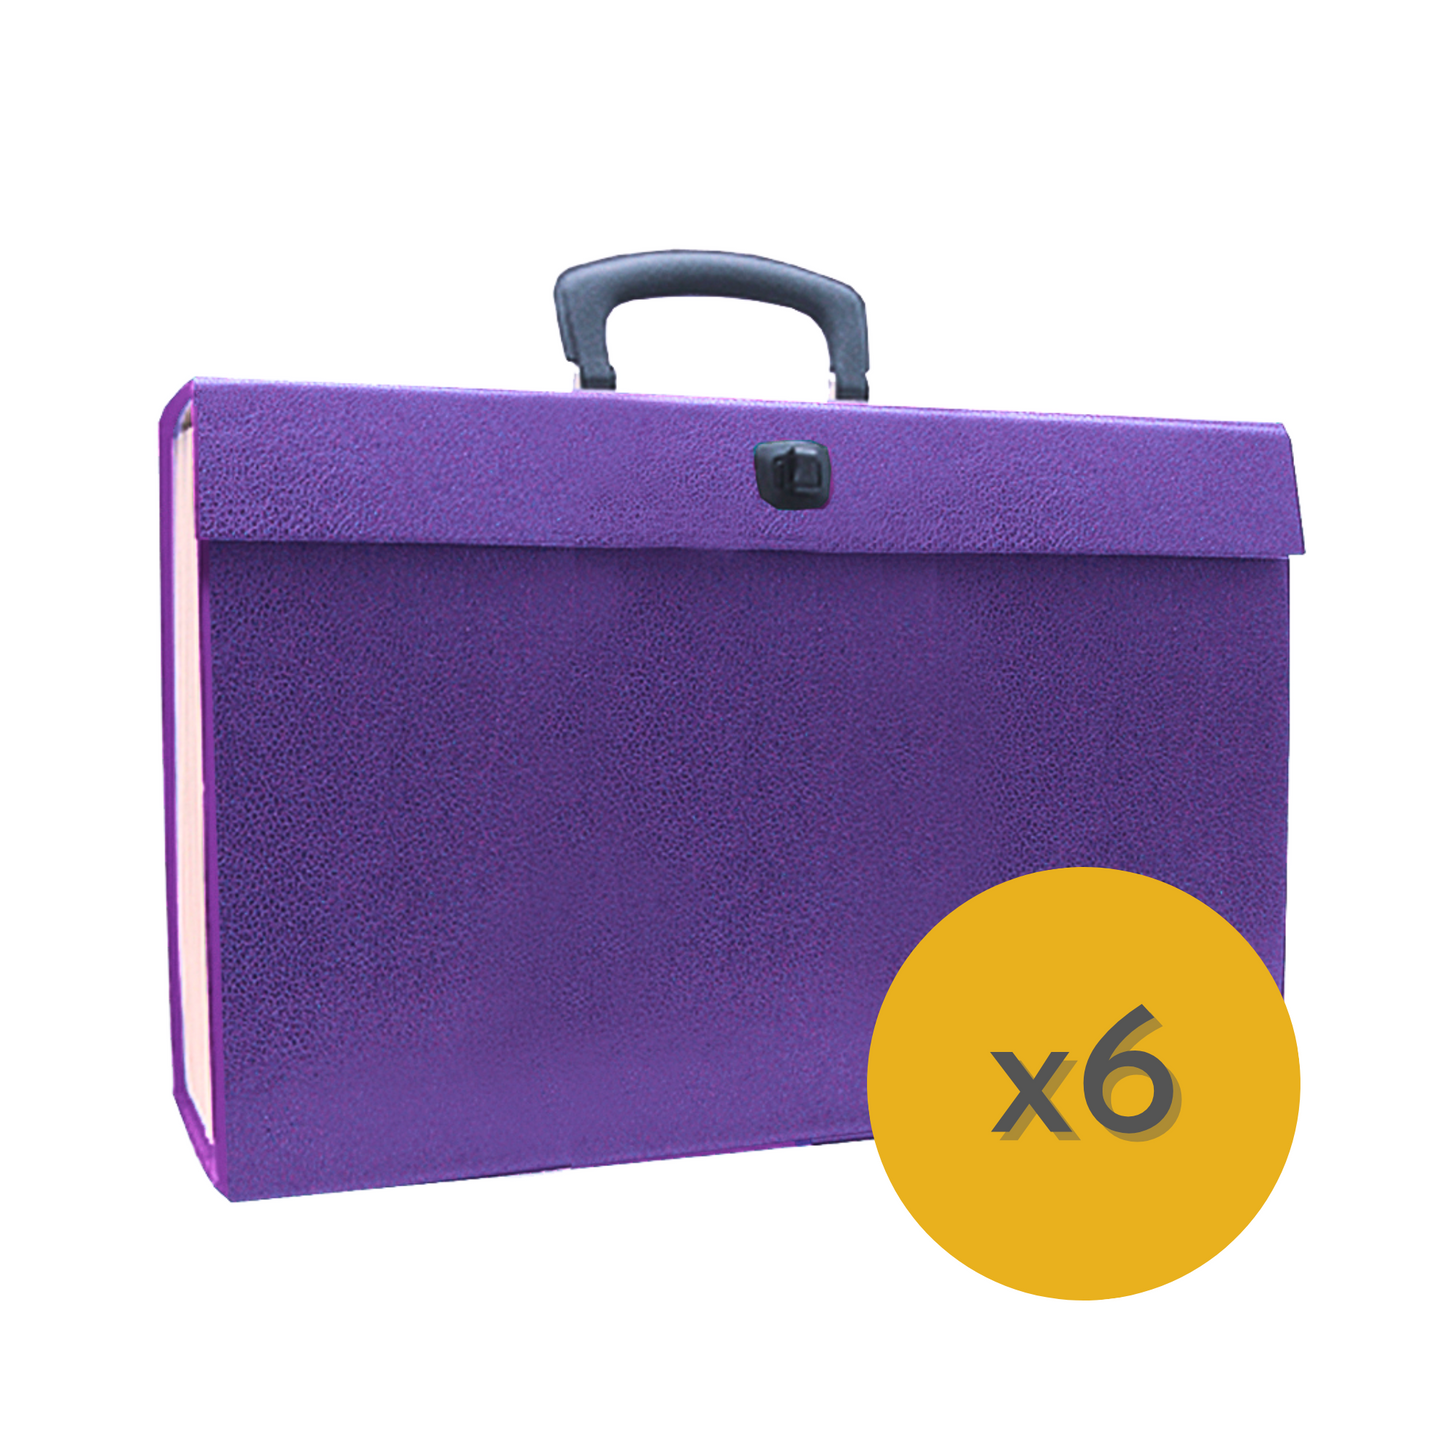 The image displays a purple, textured expanding file case with a handle and a clasp for secure closure. It's a portable filing solution typically used for organizing and transporting documents. A yellow circle with the inscription "x6" shows that this product is available as part of a pack of six, indicating a bulk purchase or a package deal. The design suggests practicality and convenience for users needing to carry and access their files on the go.